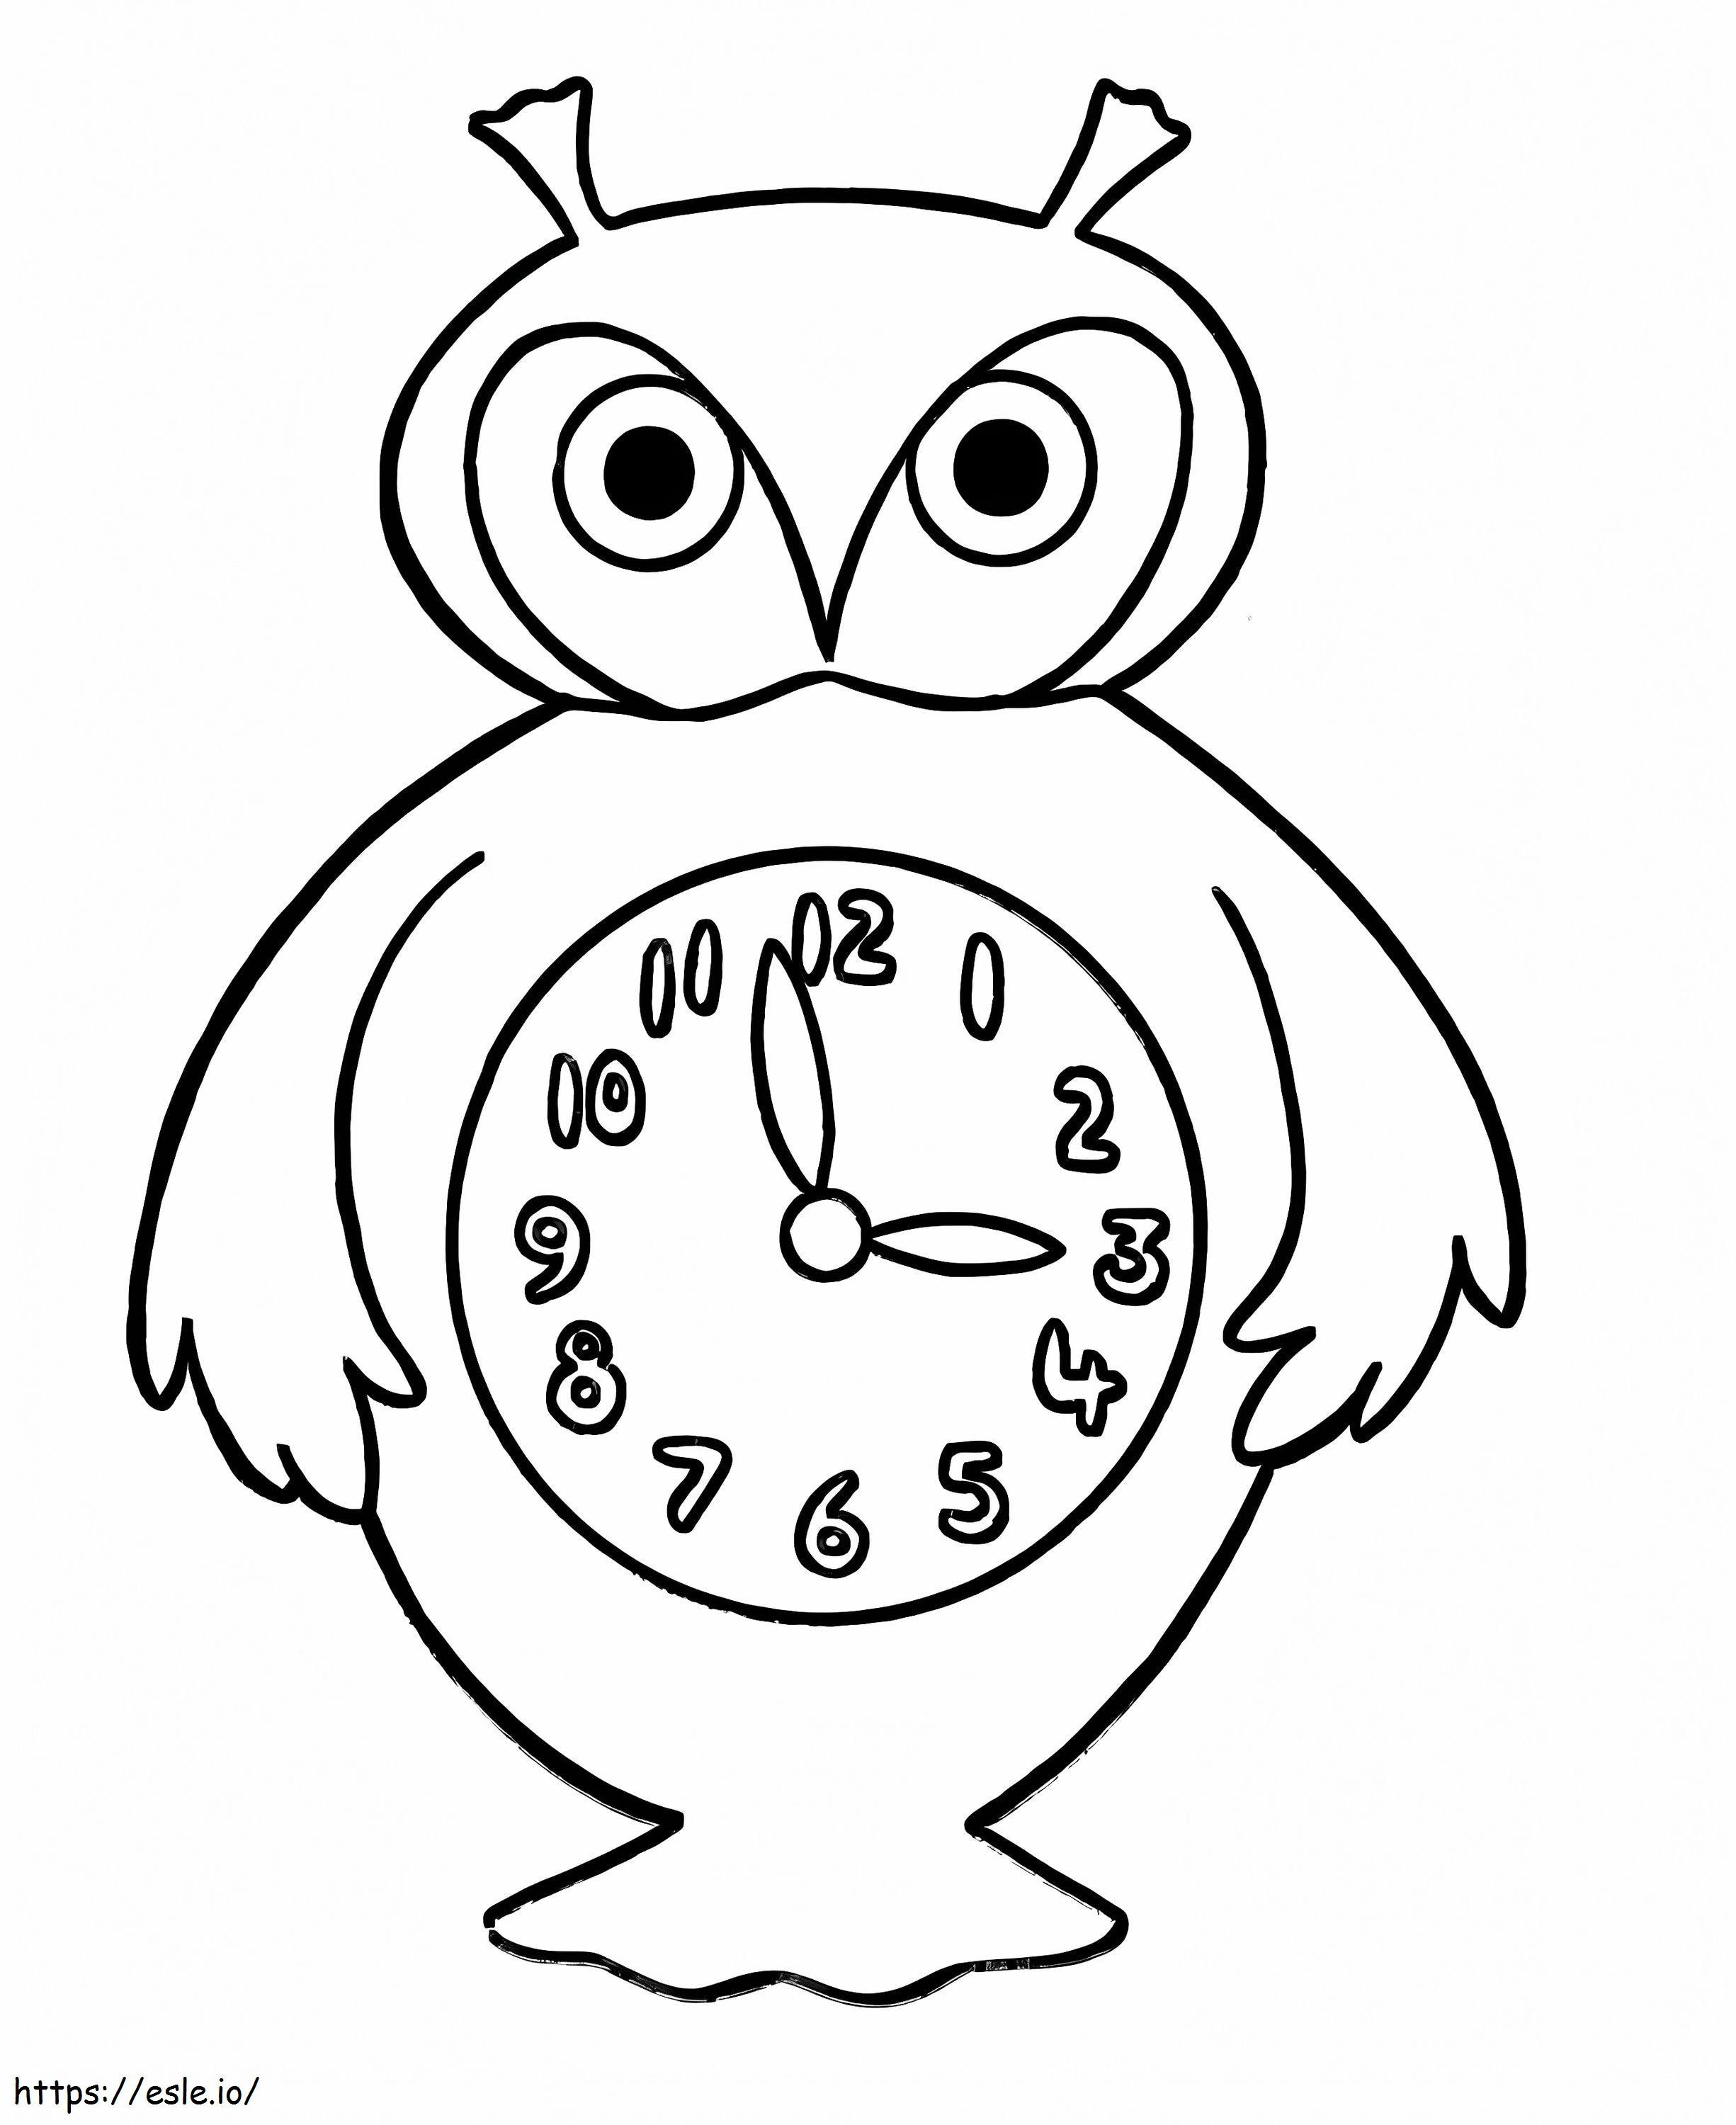 Owl Clock coloring page